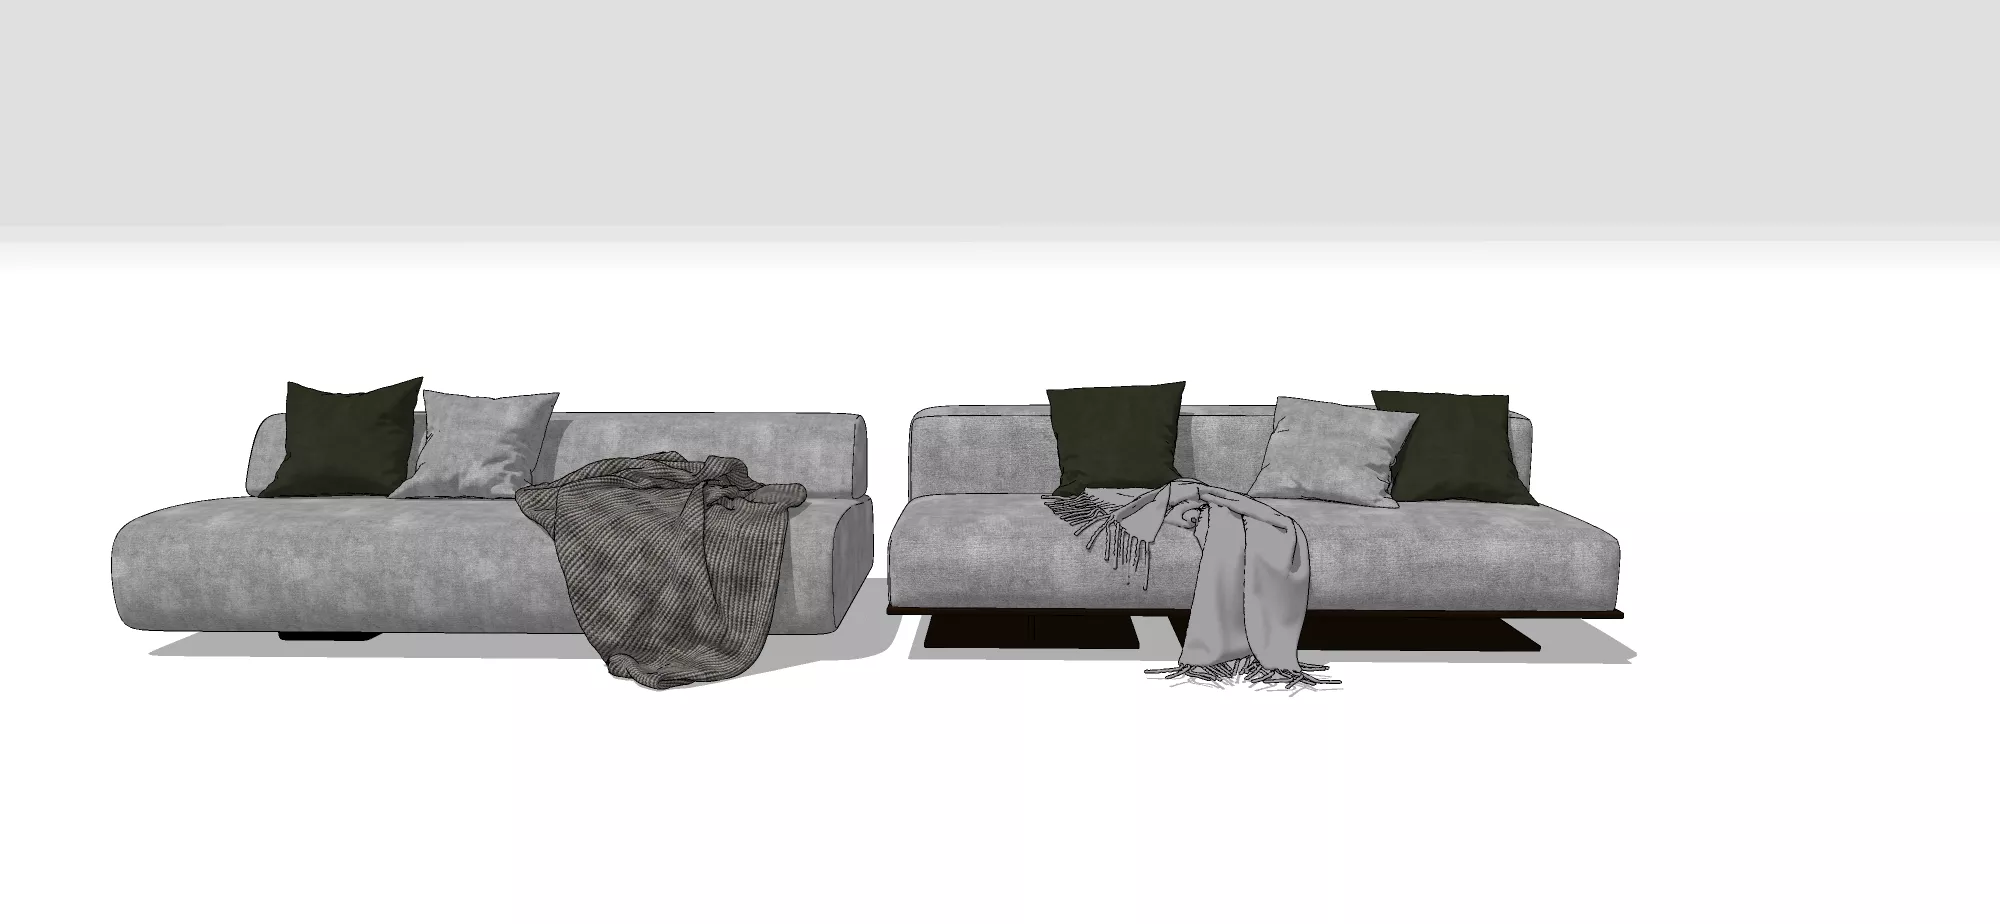 MODERN SOFA - SKETCHUP 3D MODEL - VRAY OR ENSCAPE - ID13118